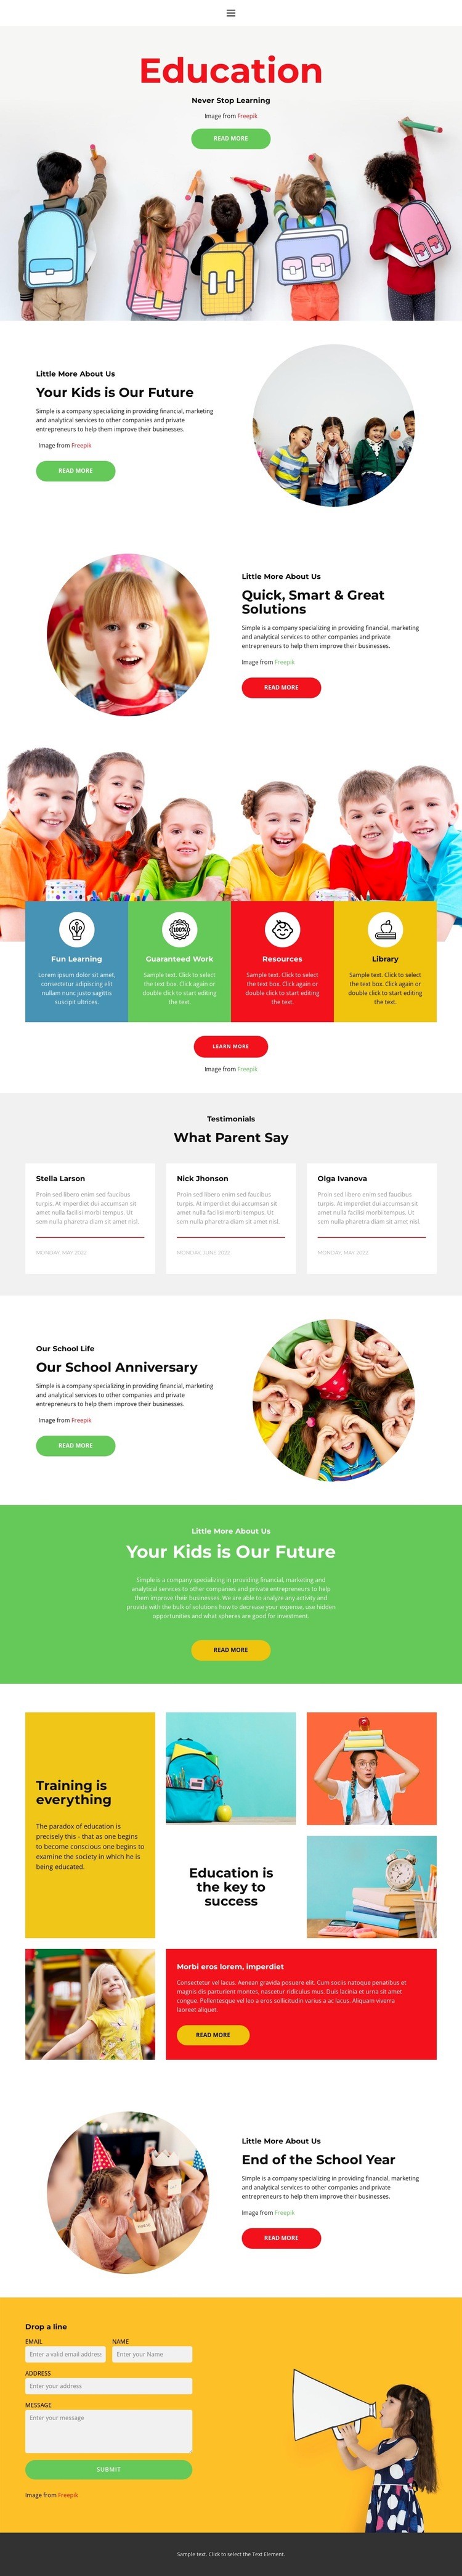 Our School Life Web Page Design